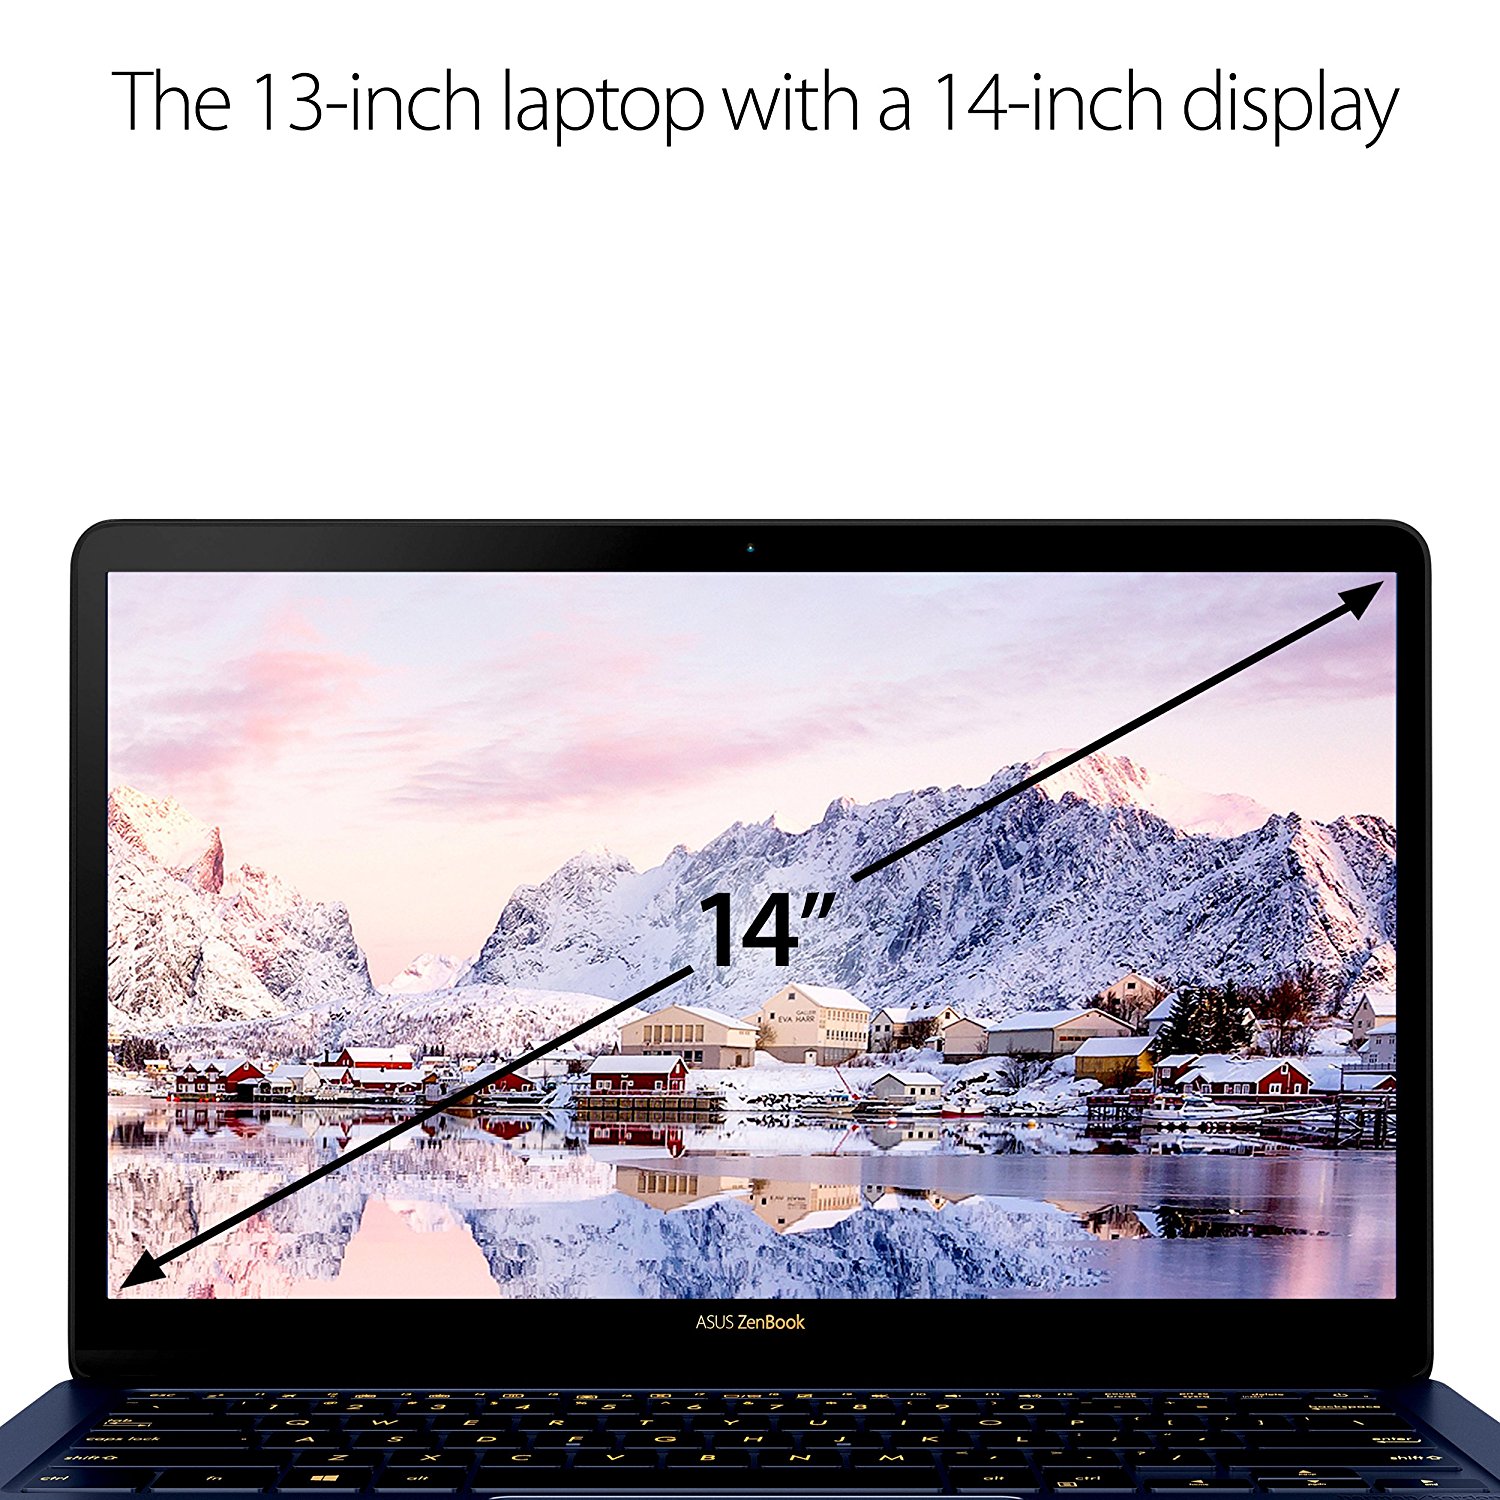 Top 10 Best Cheap Laptops for Students 2017: Compare Buy & Save | Heavy.com